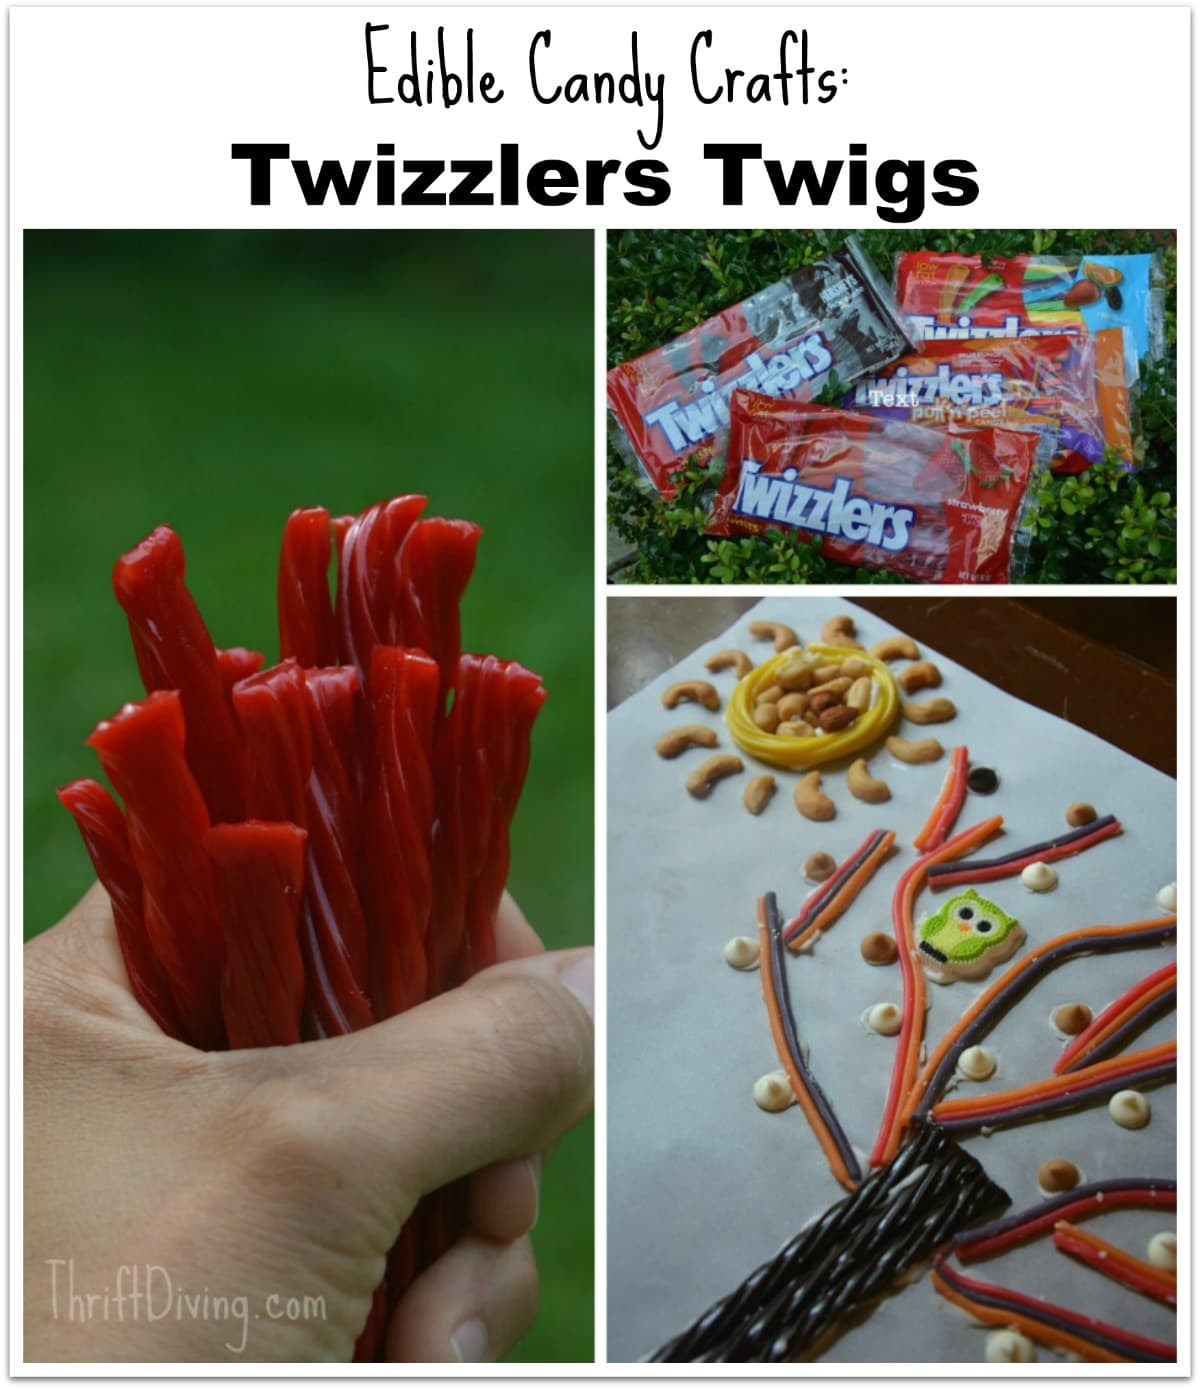 Candy Crafts: Make Edible Twizzlers Twig Trees